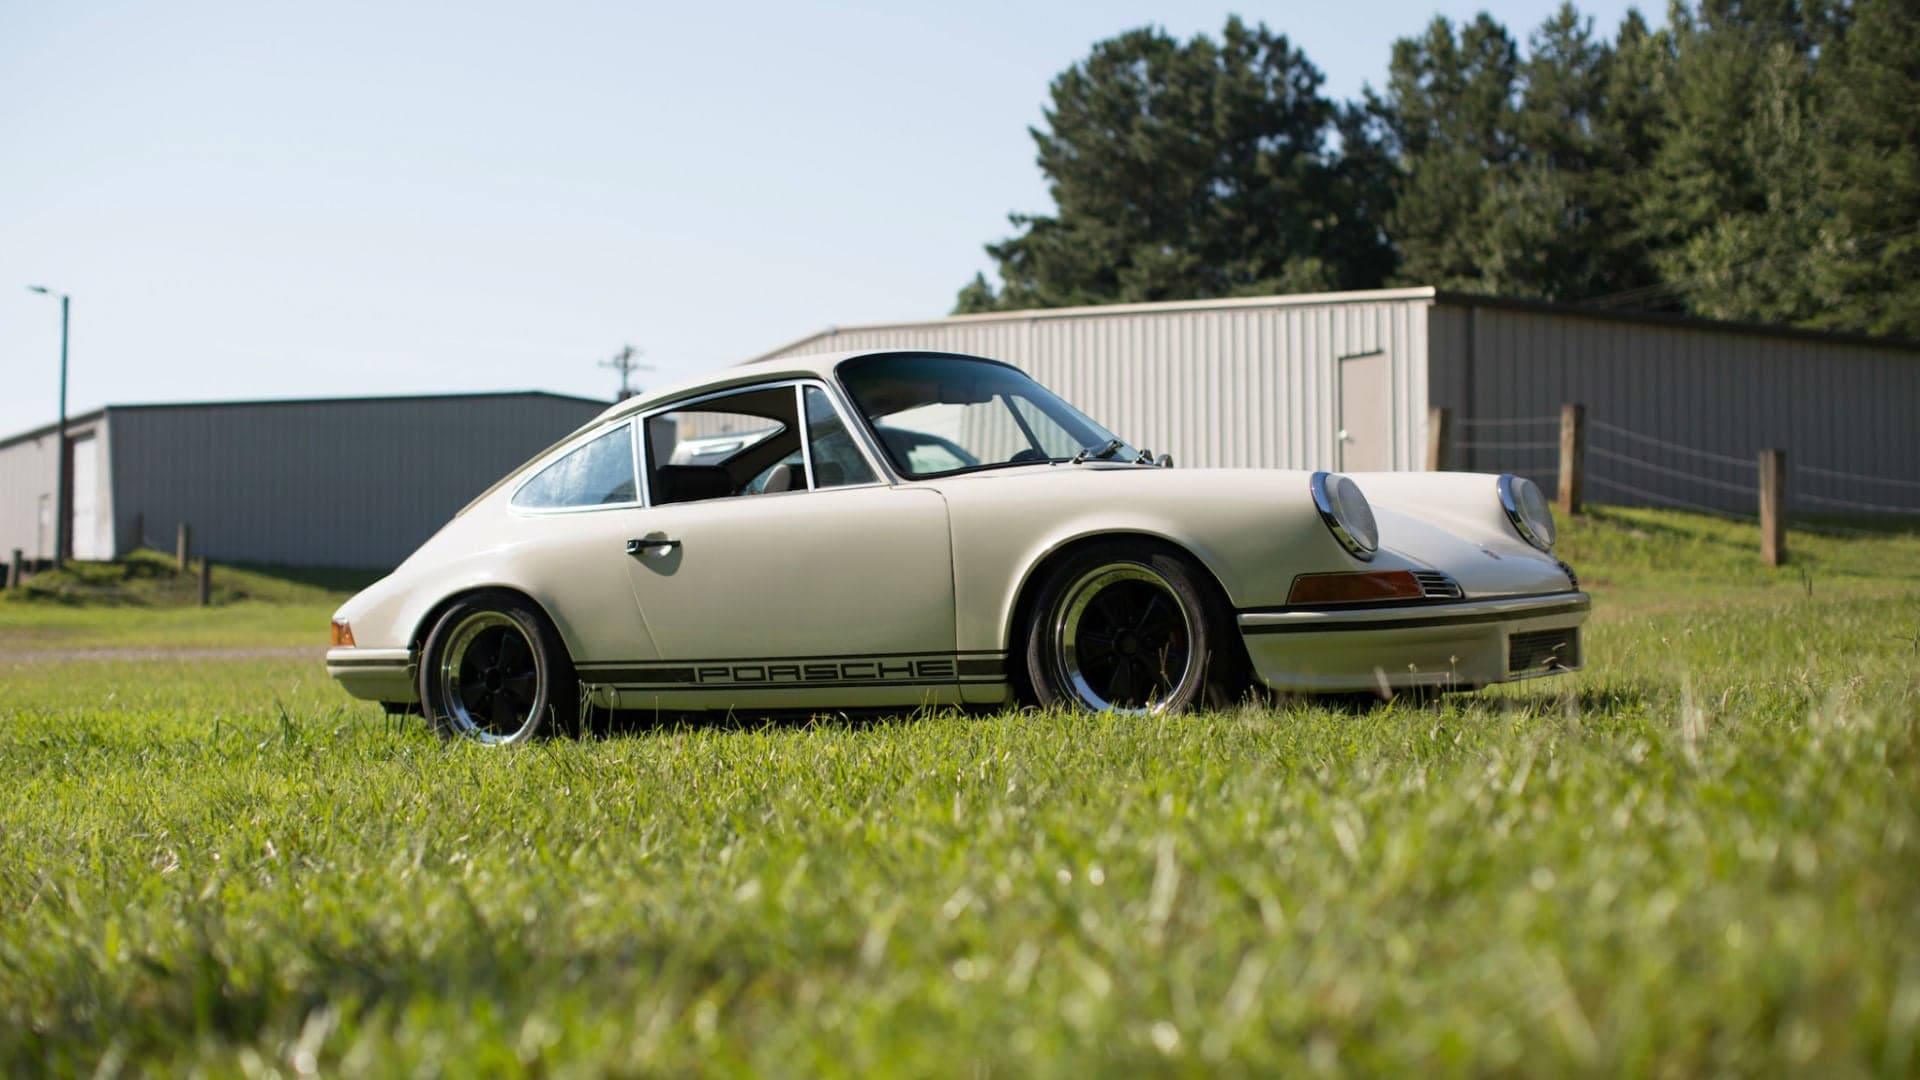 This Flat Six-Powered Porsche 912 for Sale is Almost as Good as a 911